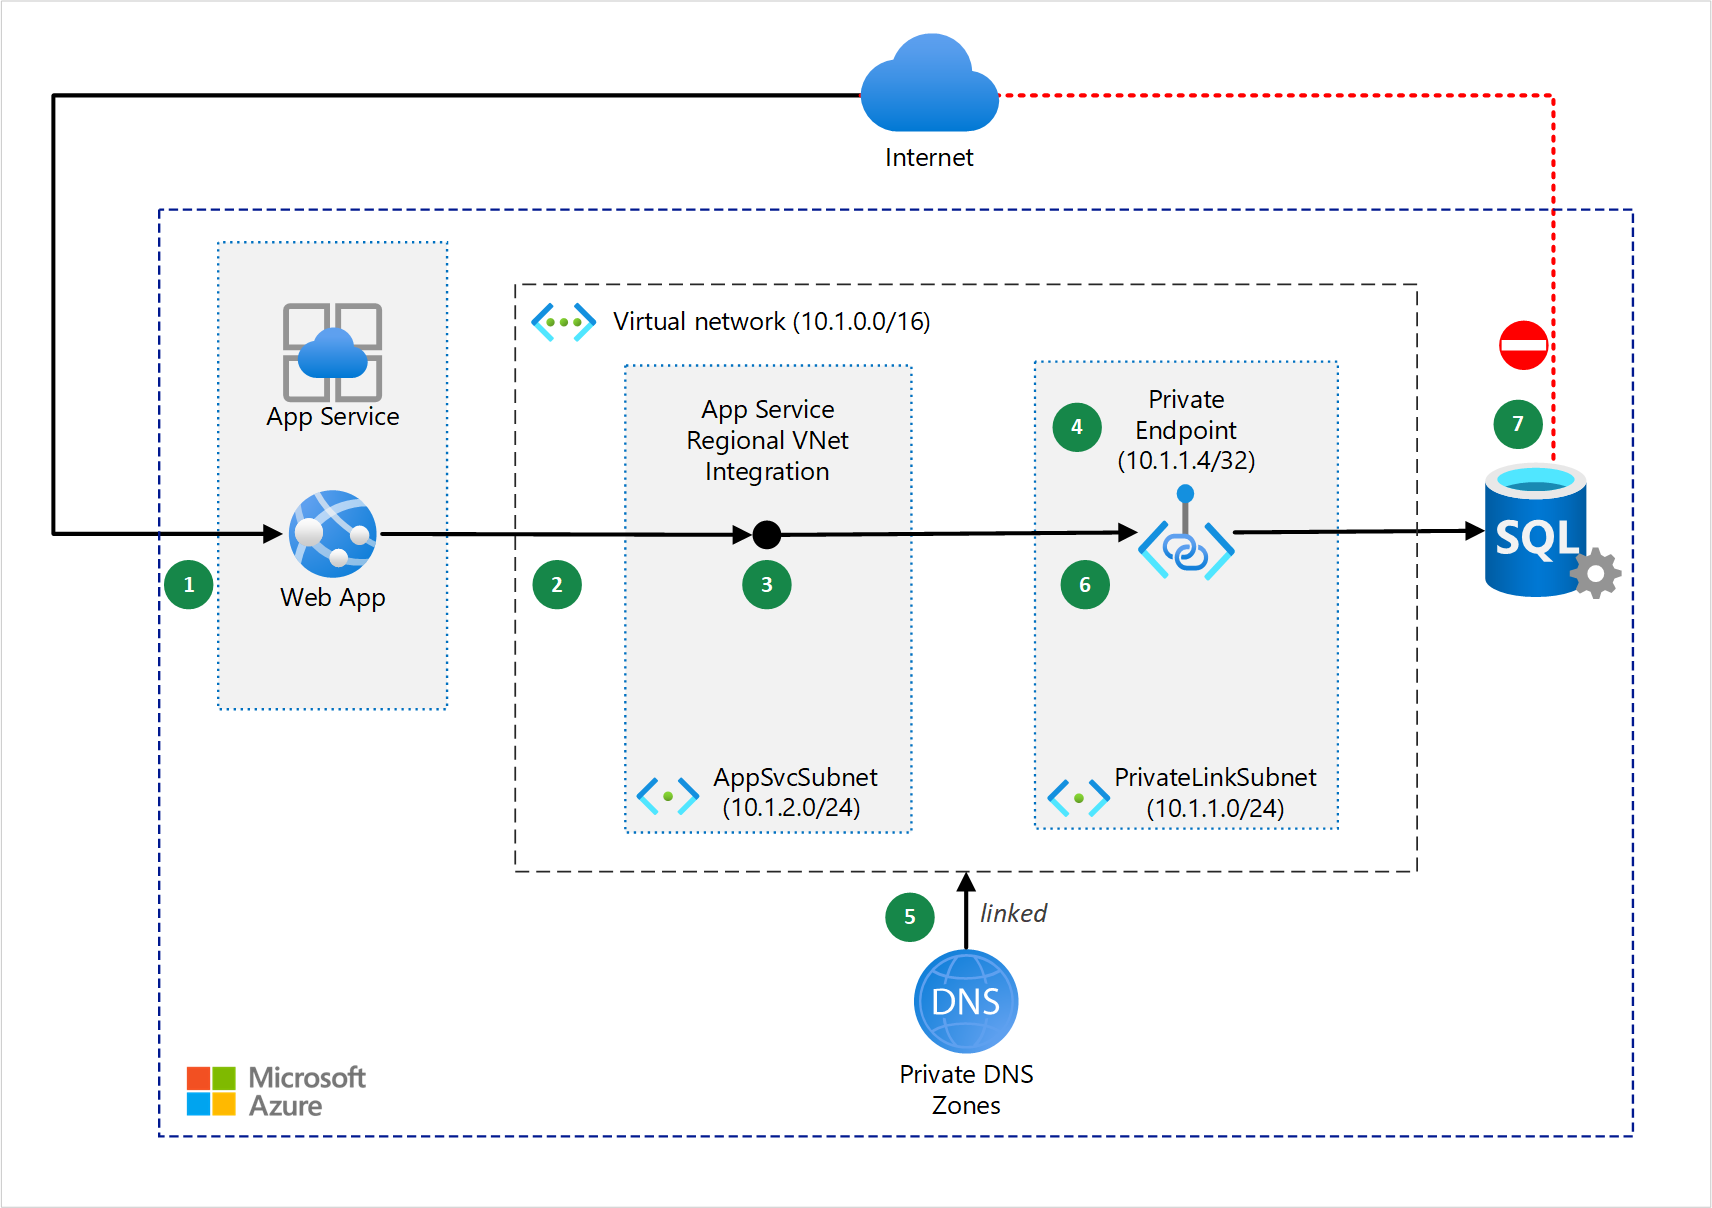 Architectural diagram showing an App Service web app connecting to a backend Azure SQL Database through a Virtual Network using Private Link to an Azure Private DNS zone.